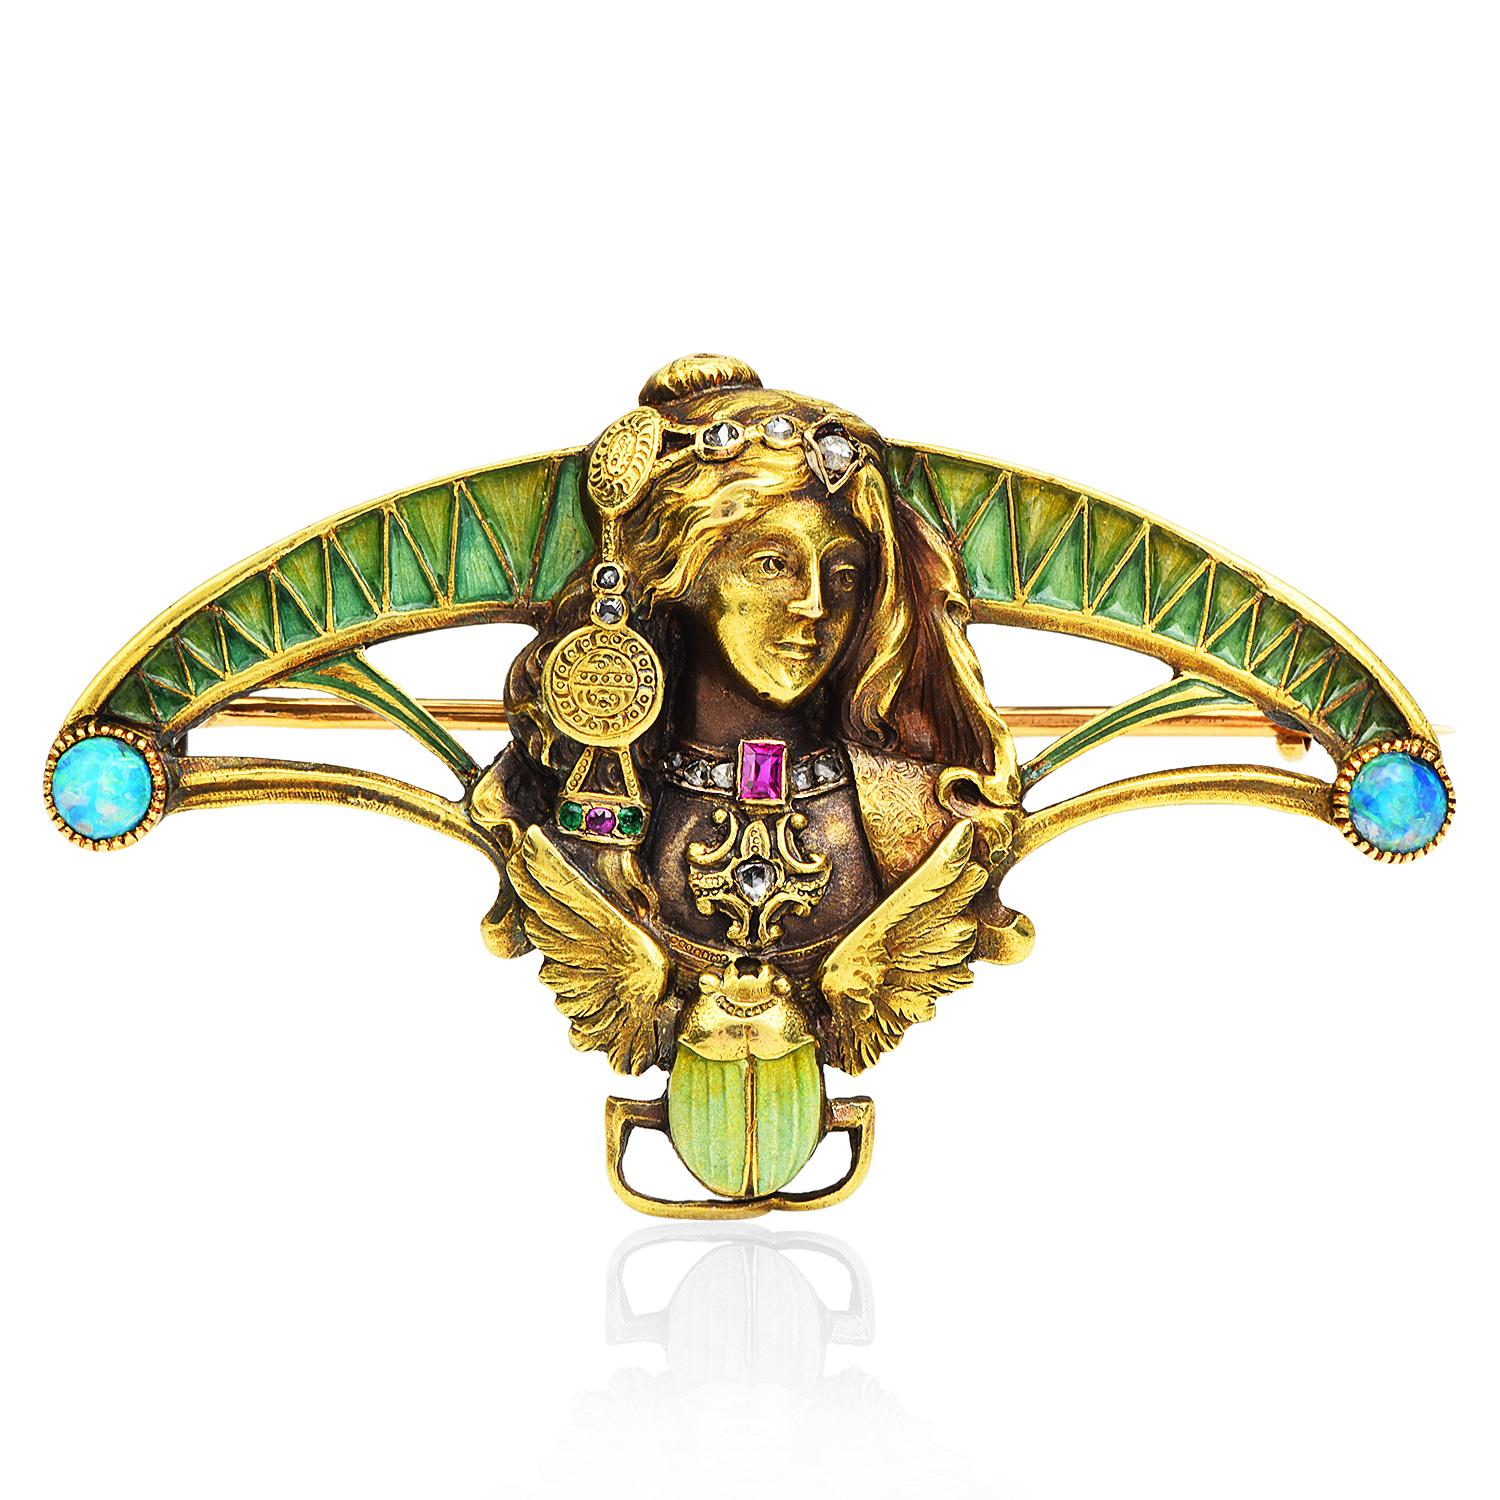 An Antique mythical Egyptian Revival Scarab with a gypsy style lady face design, enhanced by green enamel accents.

This Art Nouveau antique piece has a textured finish and is enhanced on every end by two black opal stones, with a bezel-set, of 3